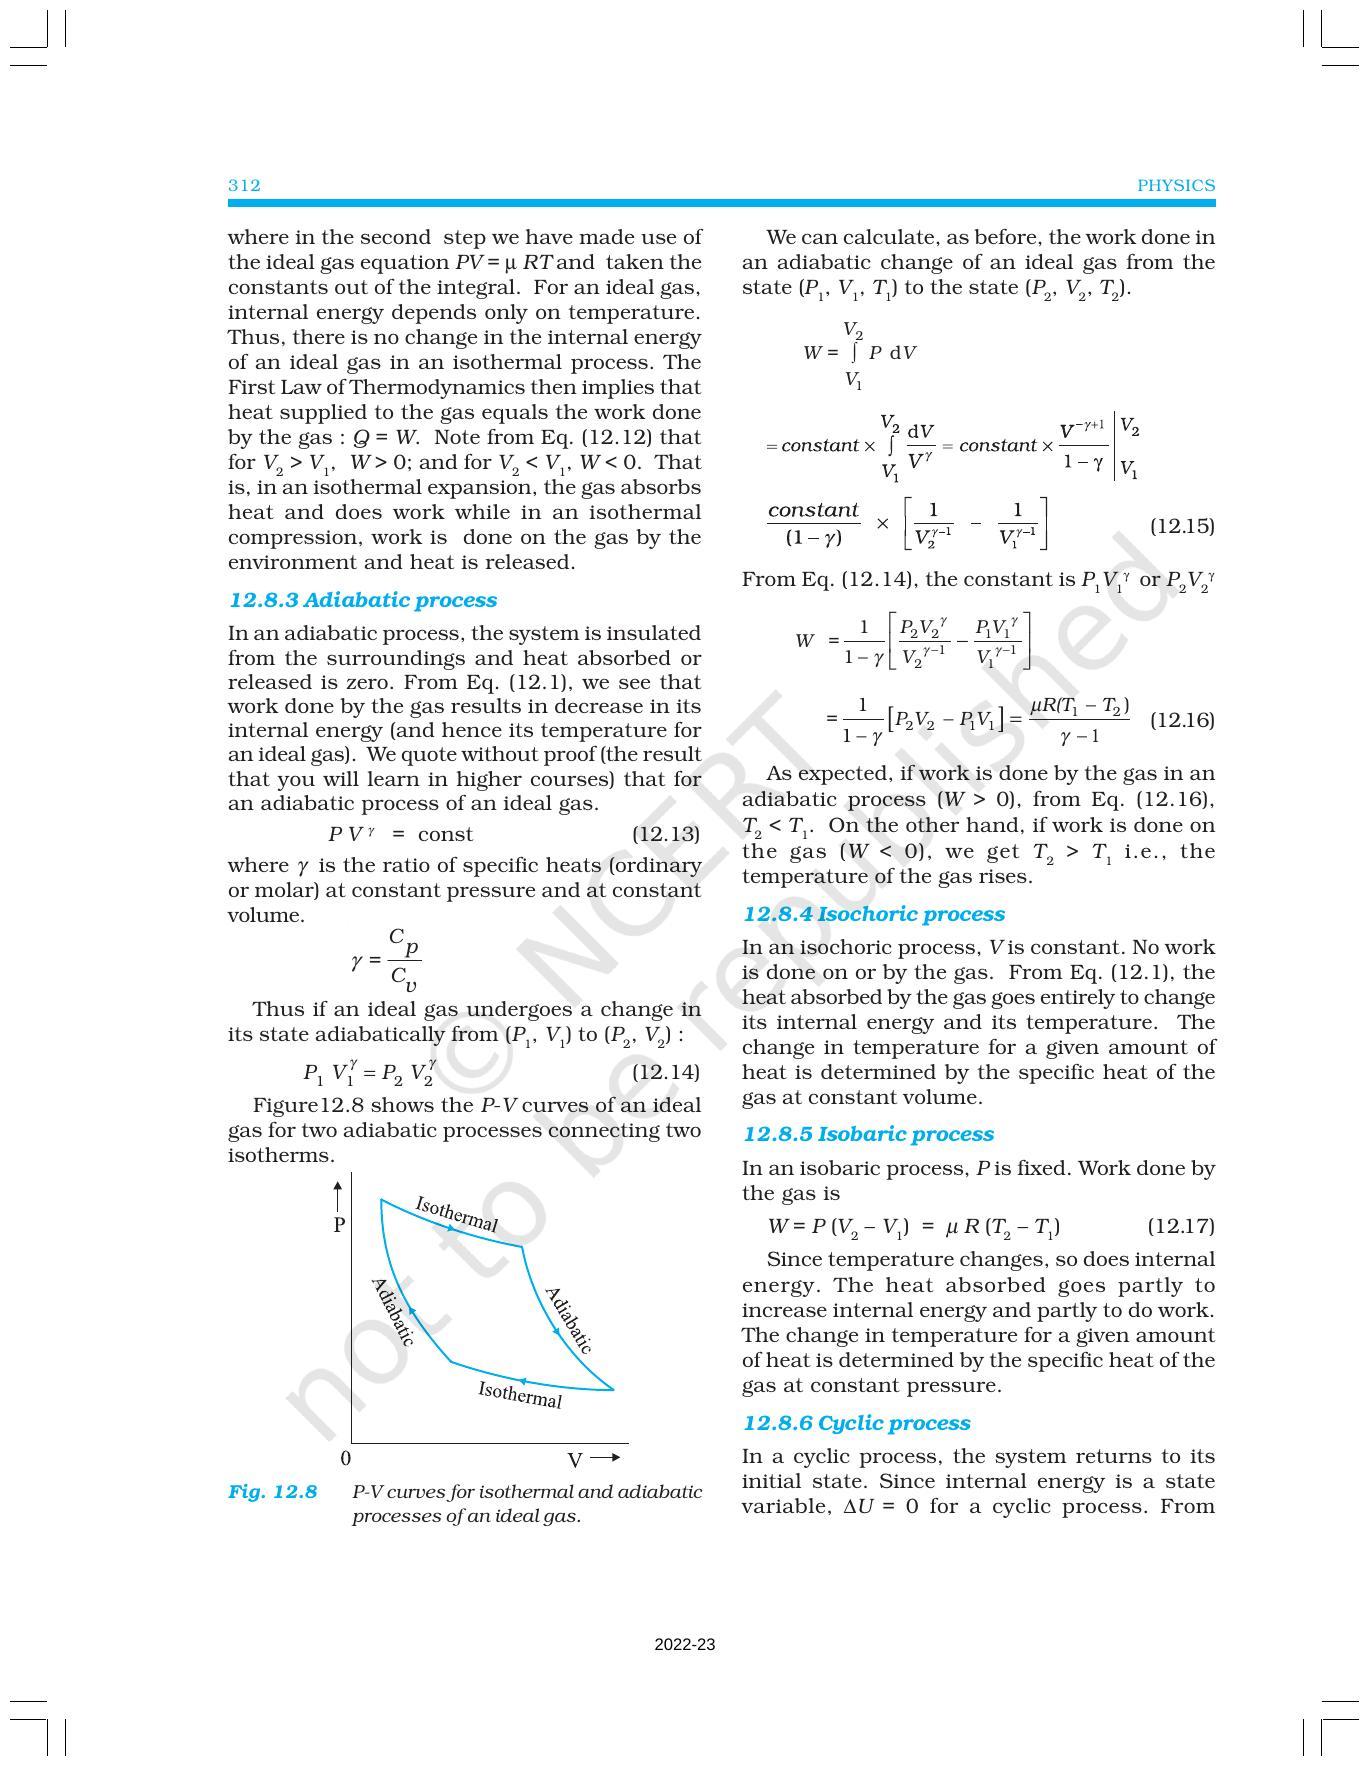 NCERT Book for Class 11 Physics Chapter 12 Thermodynamics - Page 10